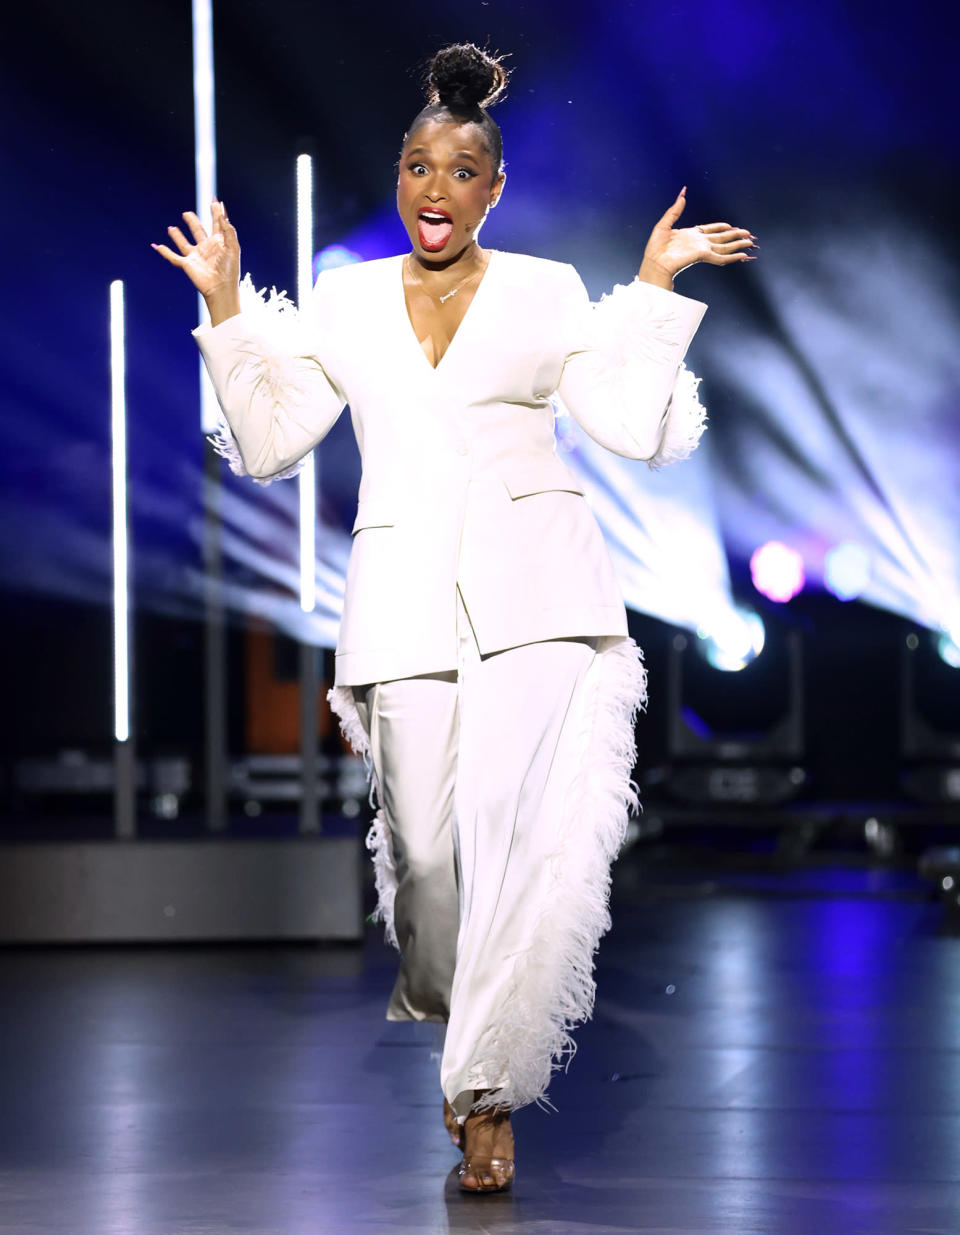 <p>As she prepares to kick off her own daytime talk show, Jennifer Hudson speaks onstage during the Warner Bros. Discovery Upfront 2022 show at MSG Studios in N.Y.C. on May 18.</p>